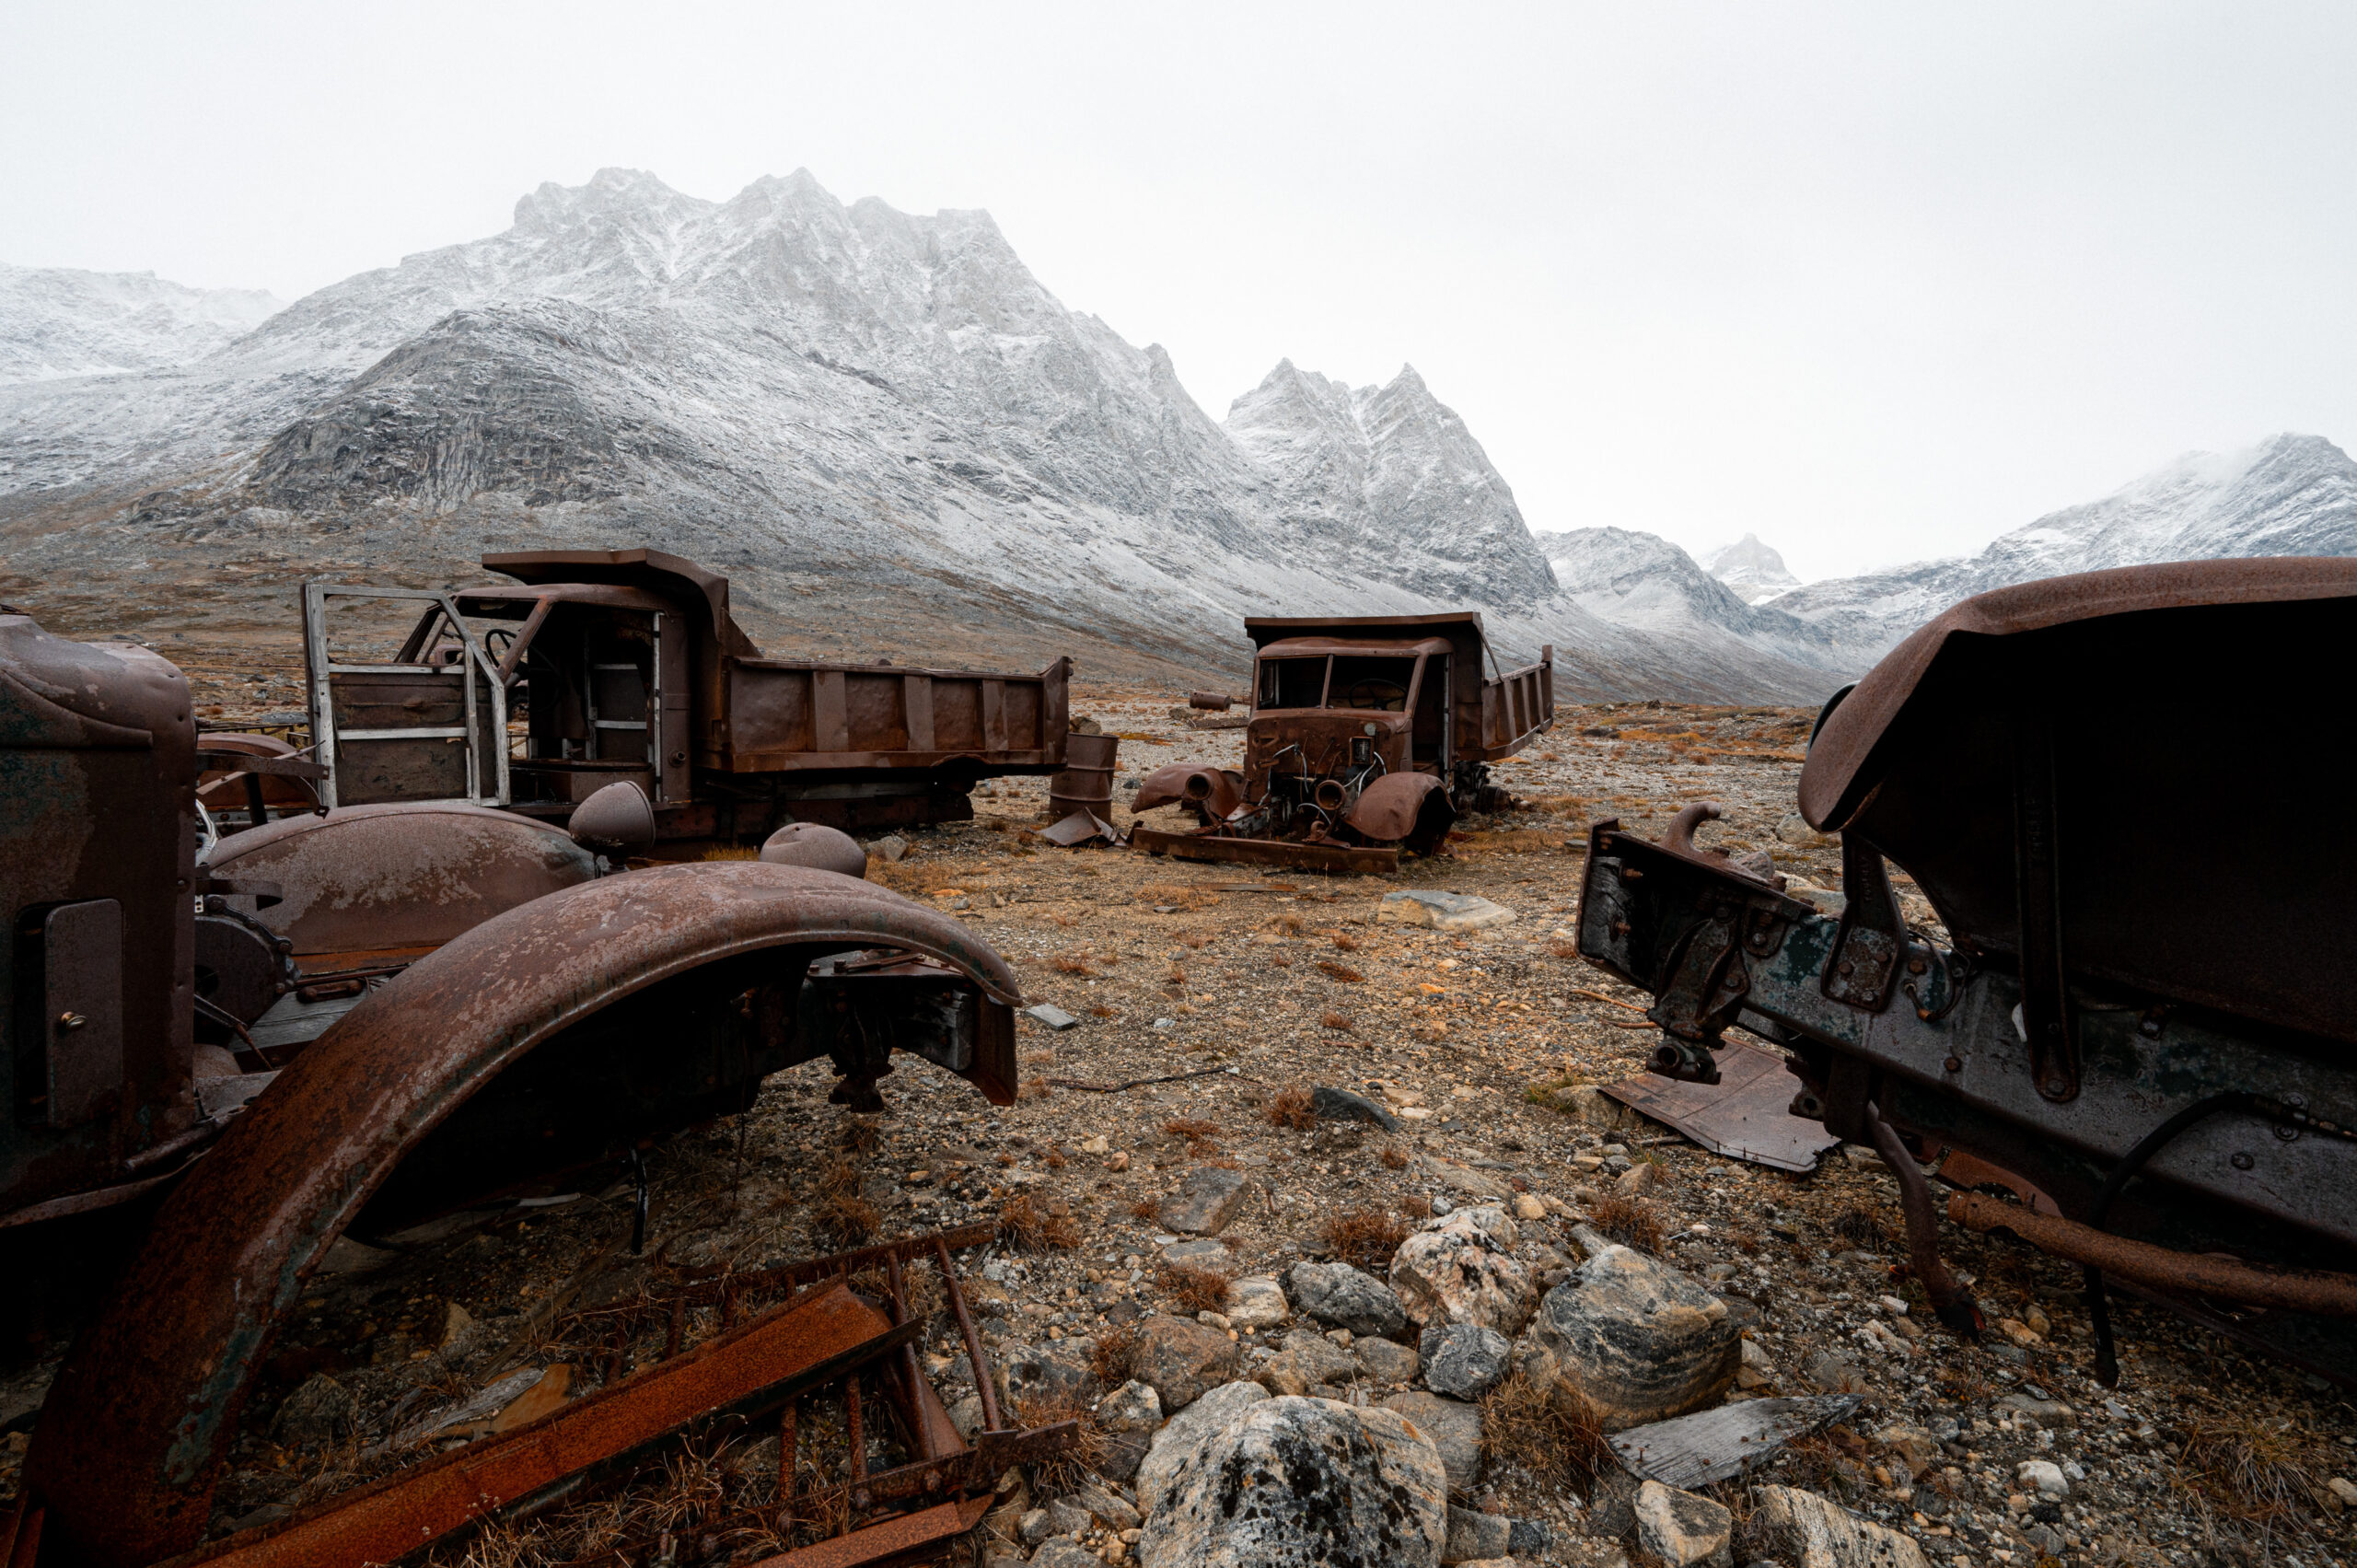 Vehicles at the abandoned American Airbase Ikateq from WWII. Photo by Chris Koenig - Visit Greenland